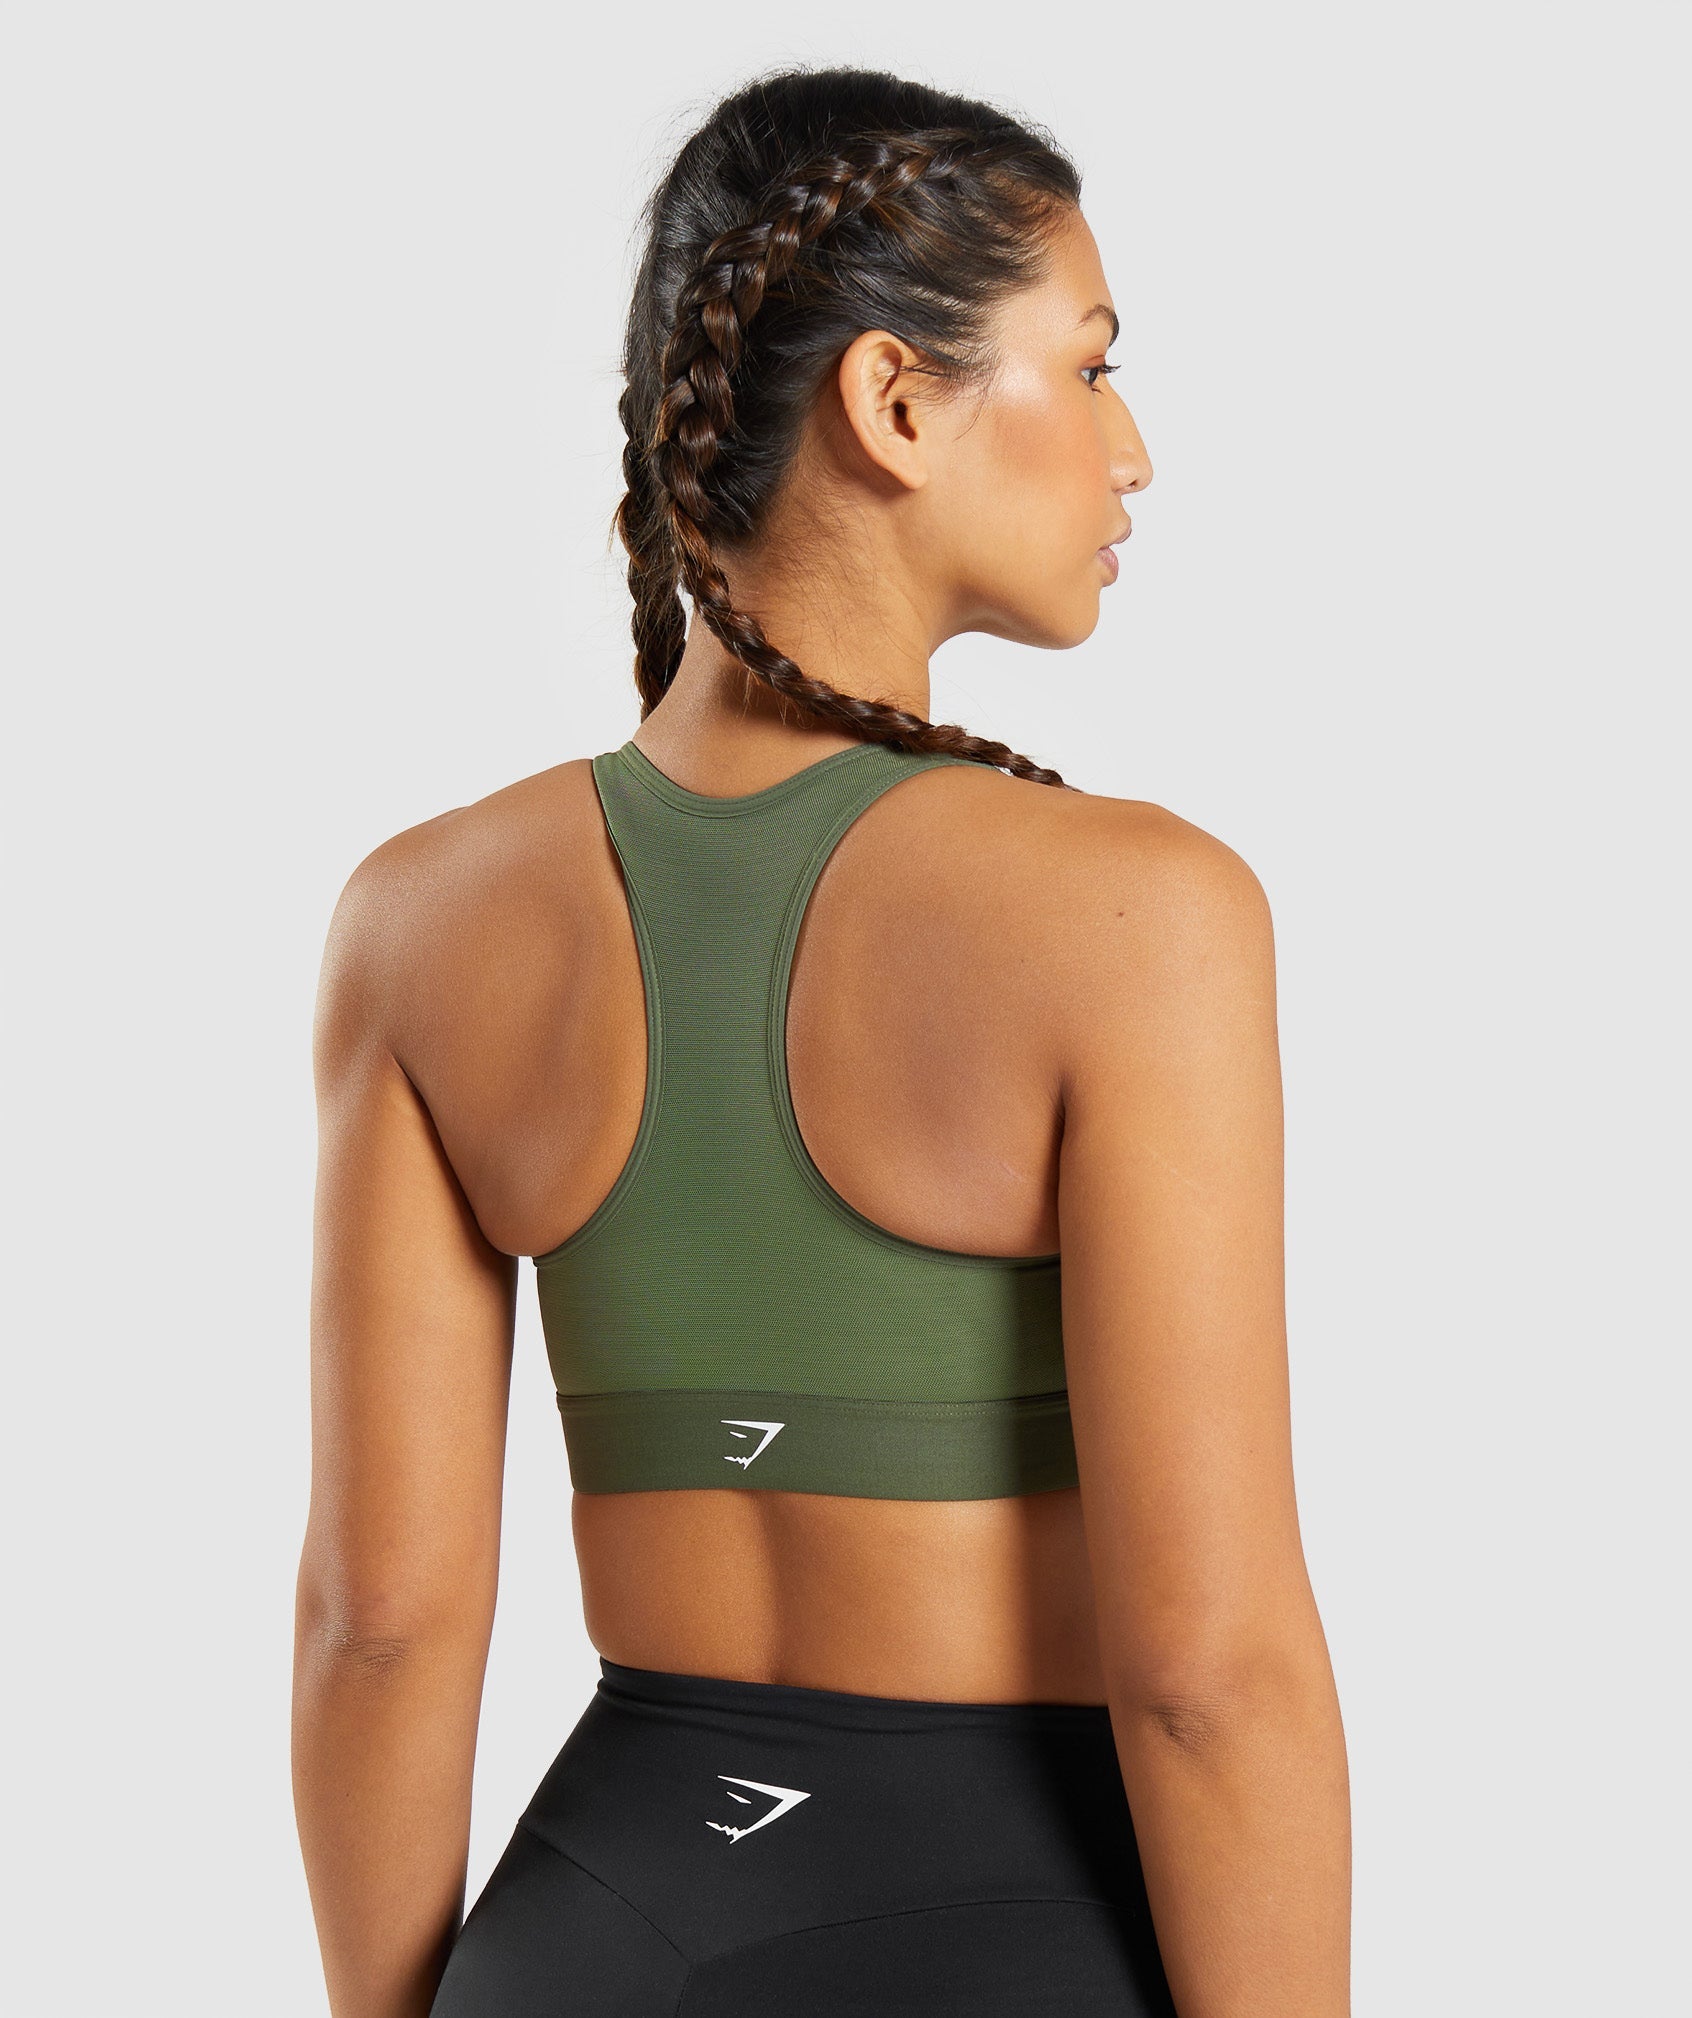 Gymshark Lightweight High Support Sports Bra in Core Olive Size XL - $27 -  From Cory